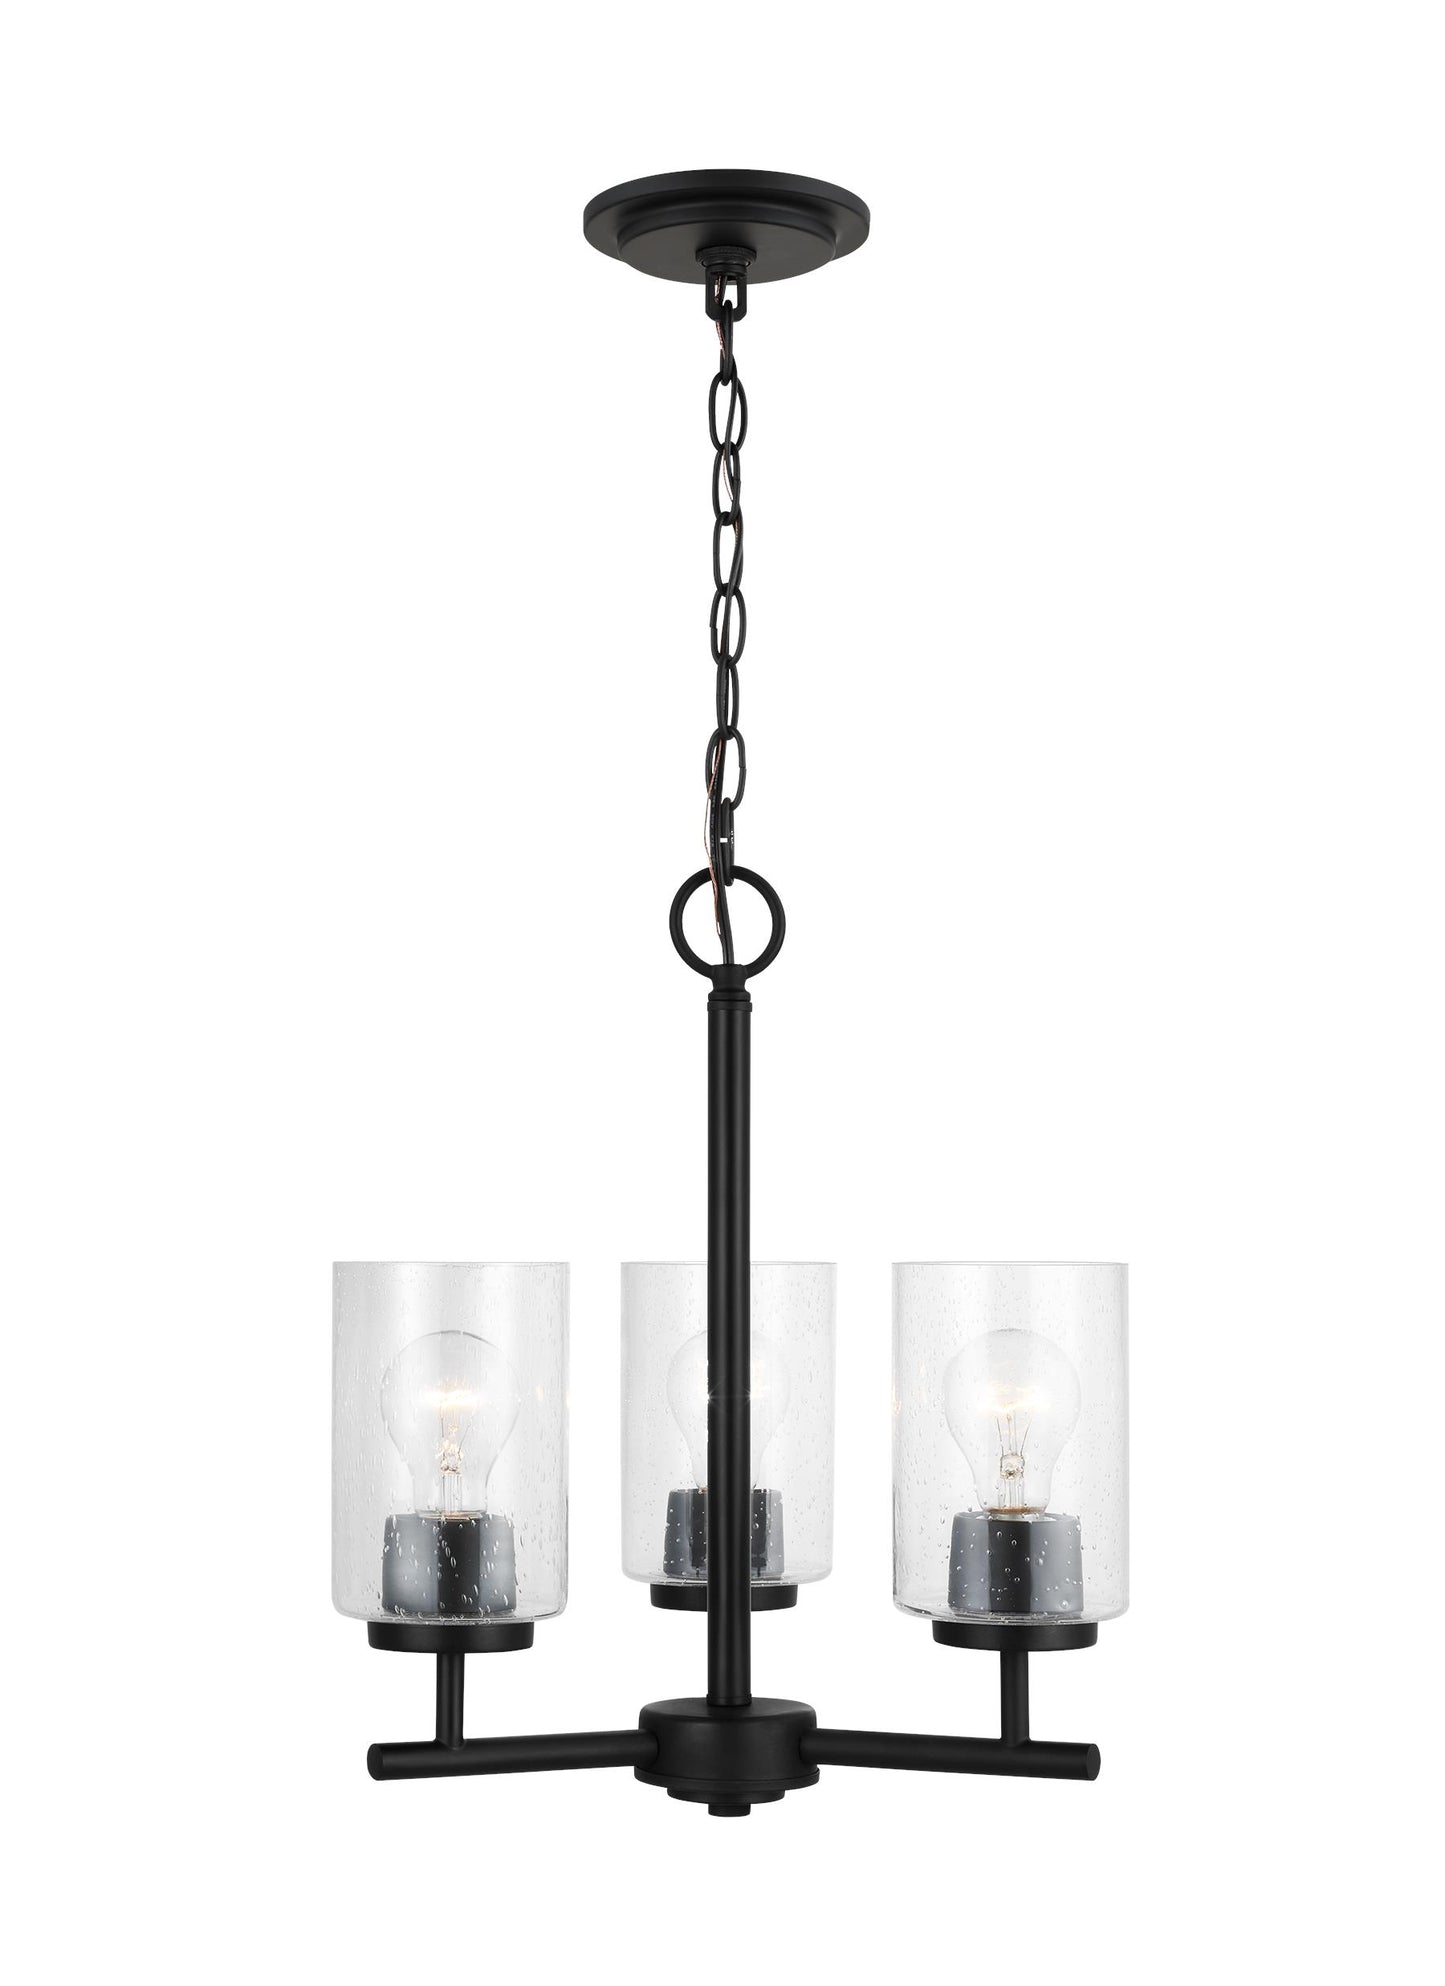 Oslo indoor dimmable 3-light chandelier in a midnight black finish with a clear seeded glass shade